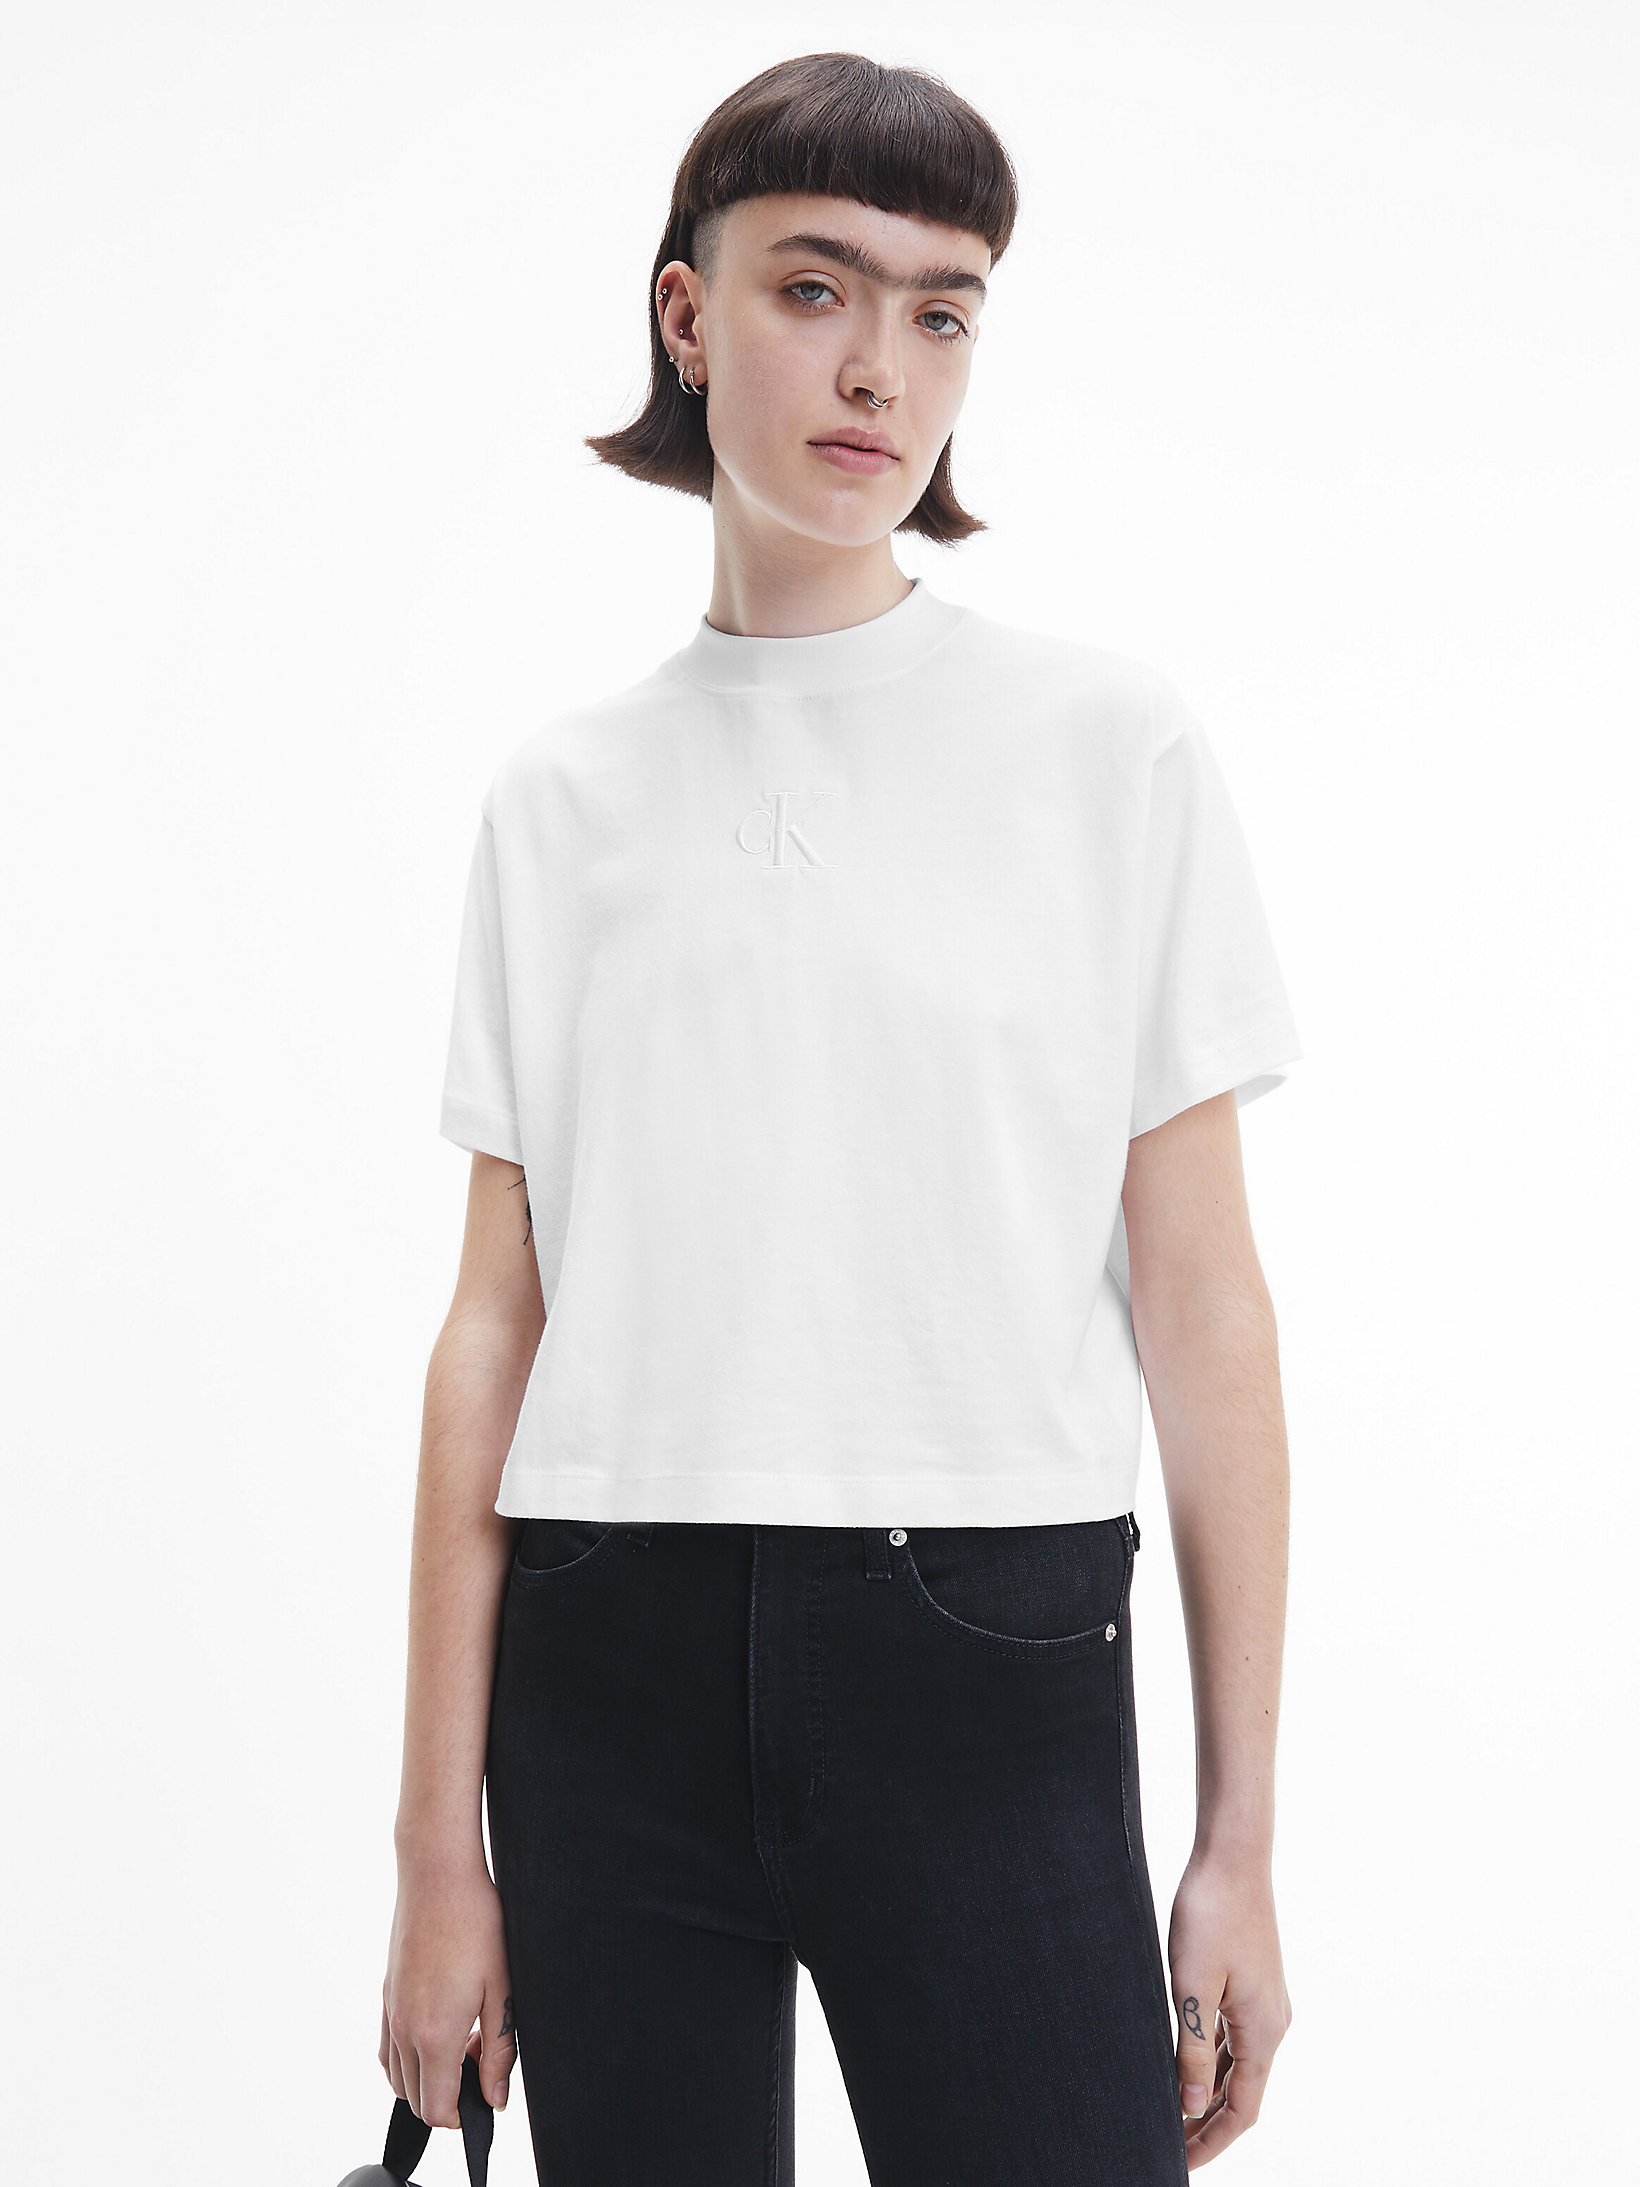 T-Shirt Taglio Relaxed > Bright White > undefined donna > Calvin Klein